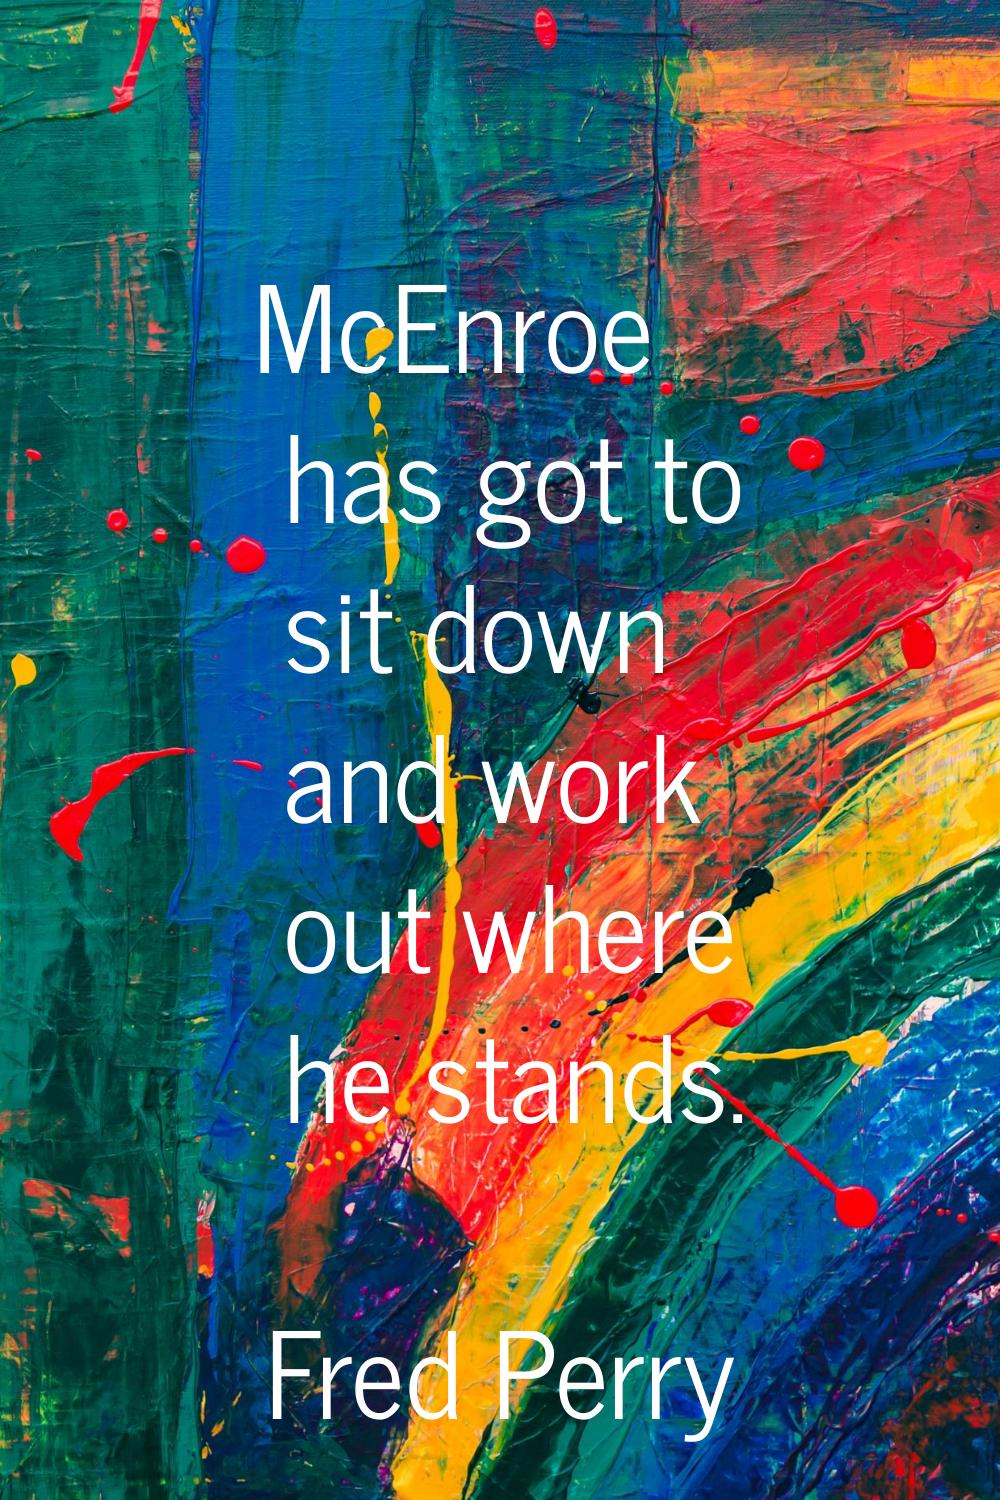 McEnroe has got to sit down and work out where he stands.